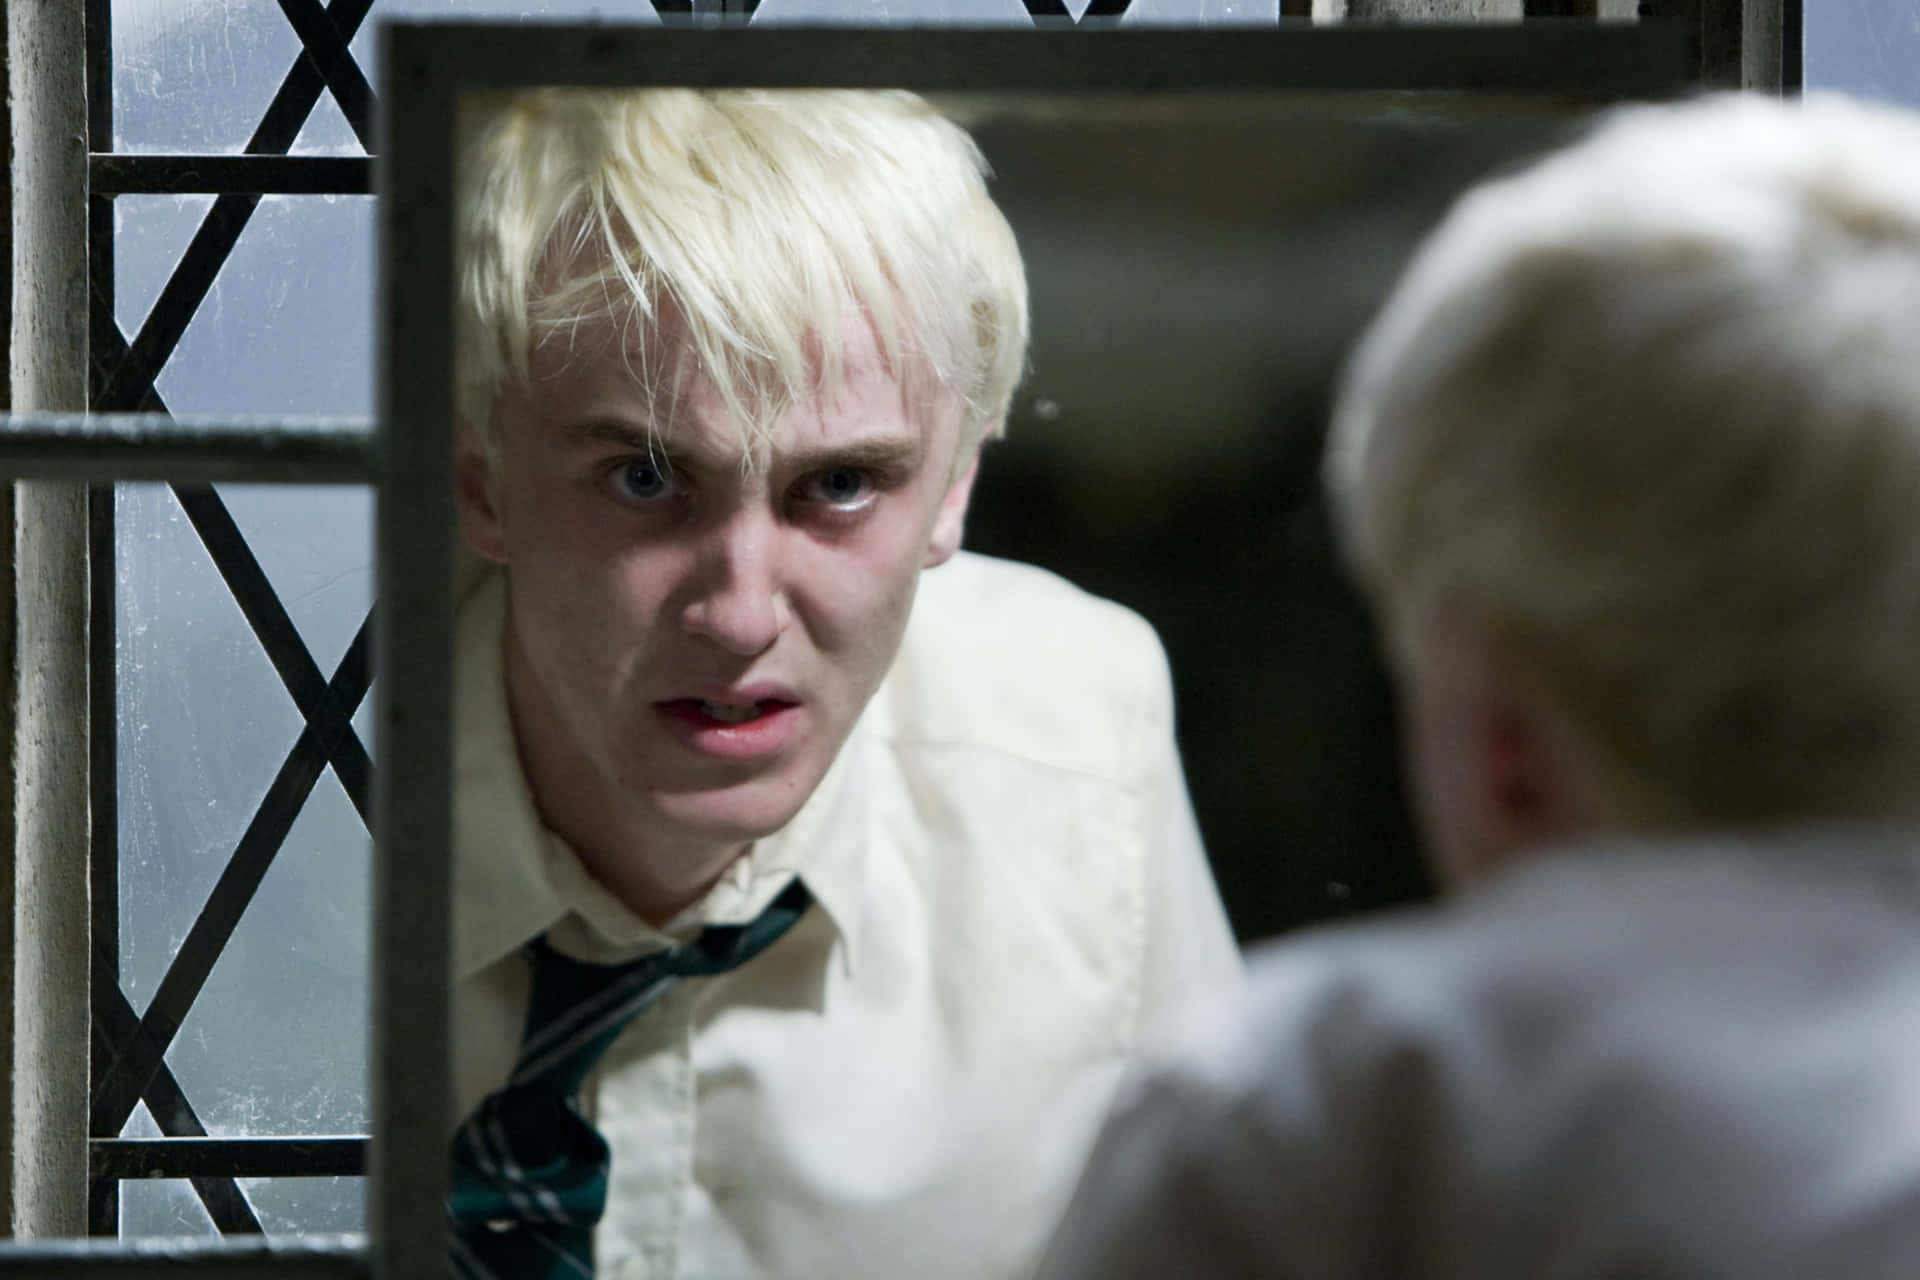 Draco Malfoy making a witty comment at Hogwarts